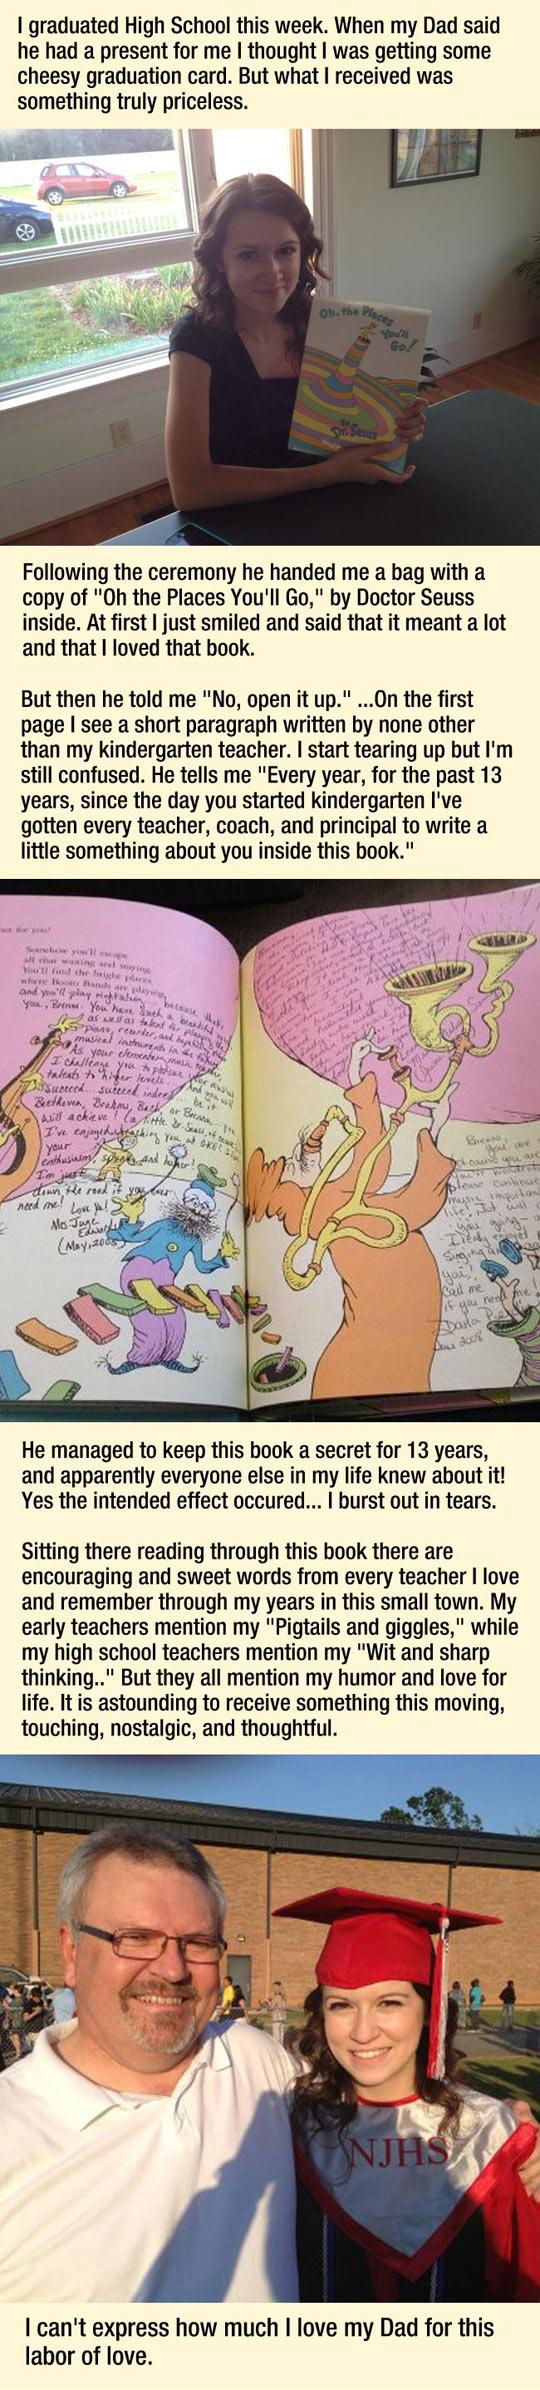 If only Dr. Seuss wasn't racist, this would be beautiful.